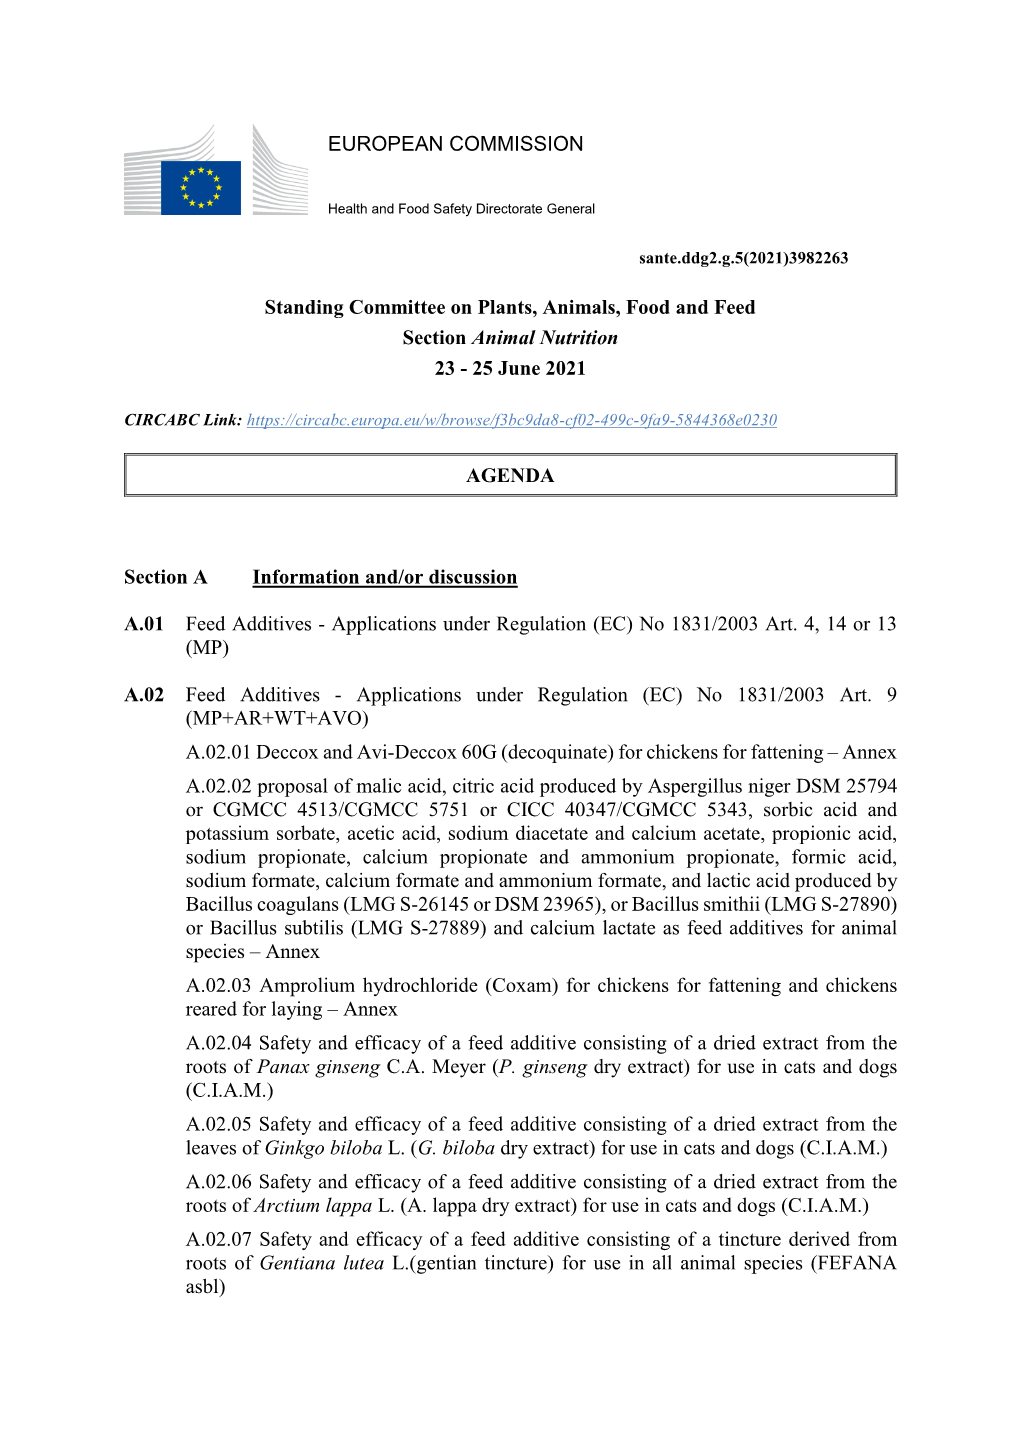 EUROPEAN COMMISSION Standing Committee on Plants, Animals, Food and Feed Section Animal Nutrition 23